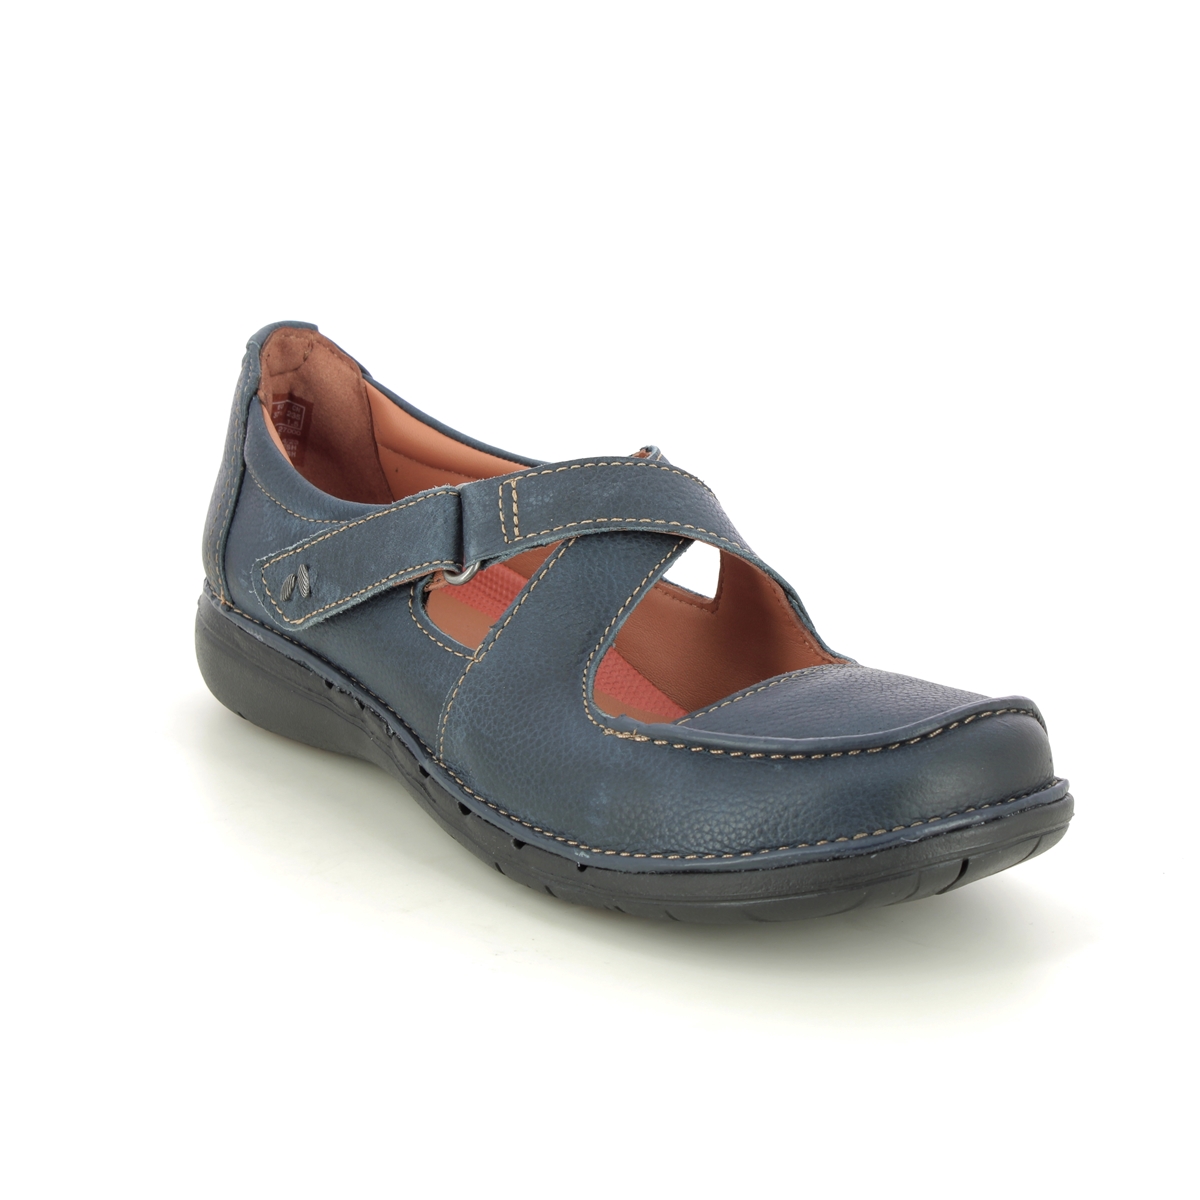 Clarks Un Loop Strap Navy Leather Womens Mary Jane Shoes 749724D In Size 4 In Plain Navy Leather